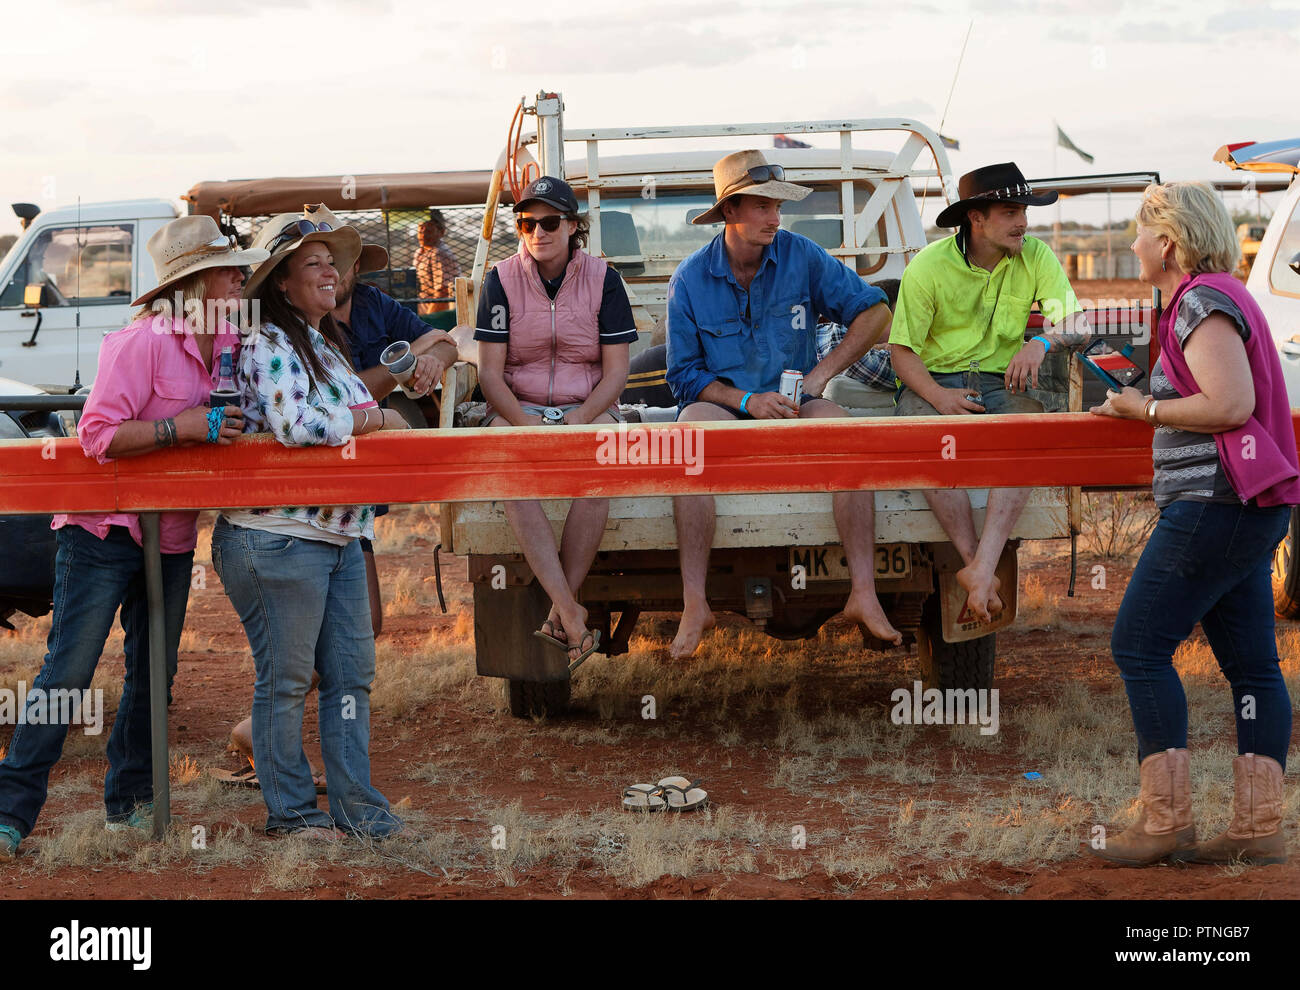 Spectators watch he 97th running of the annual bush horse races at Landor,,1000km north of Perth, Australia. Oct 2018. Stock Photo